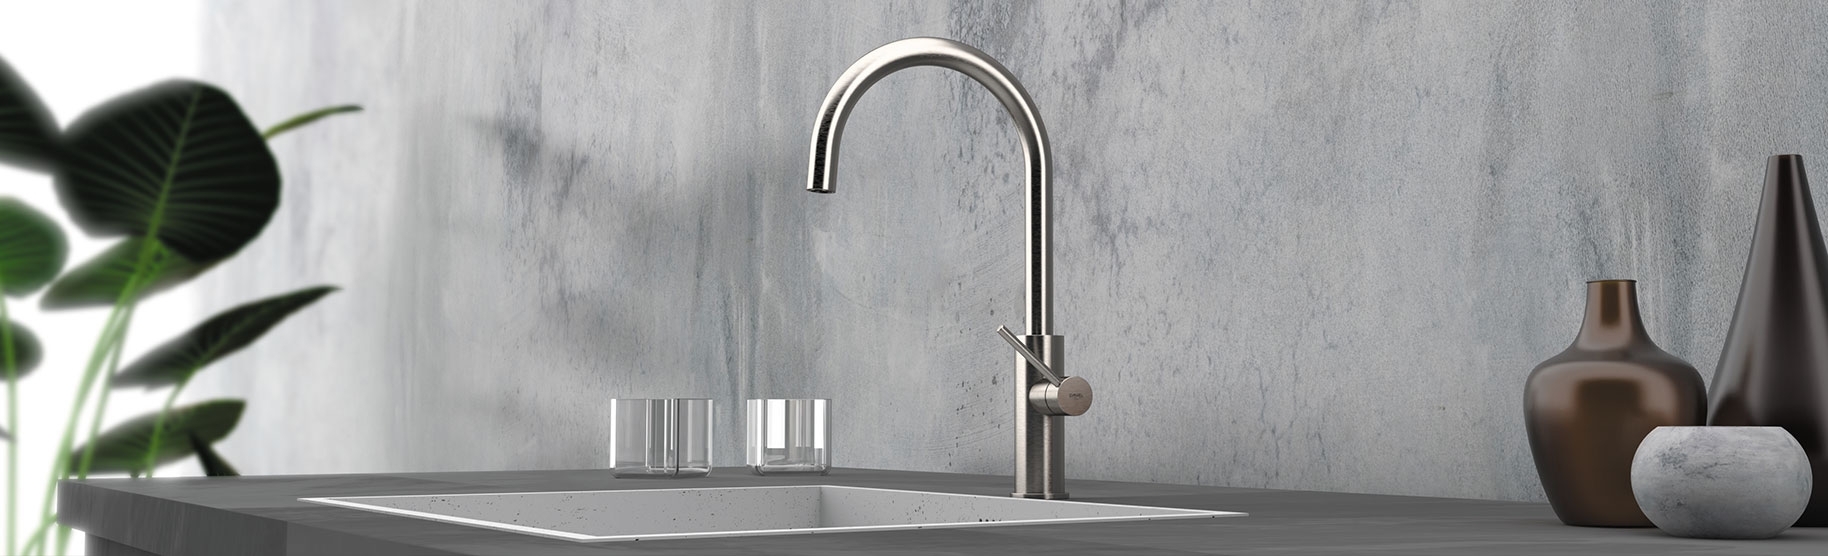 Stainless steel sink mixer taps